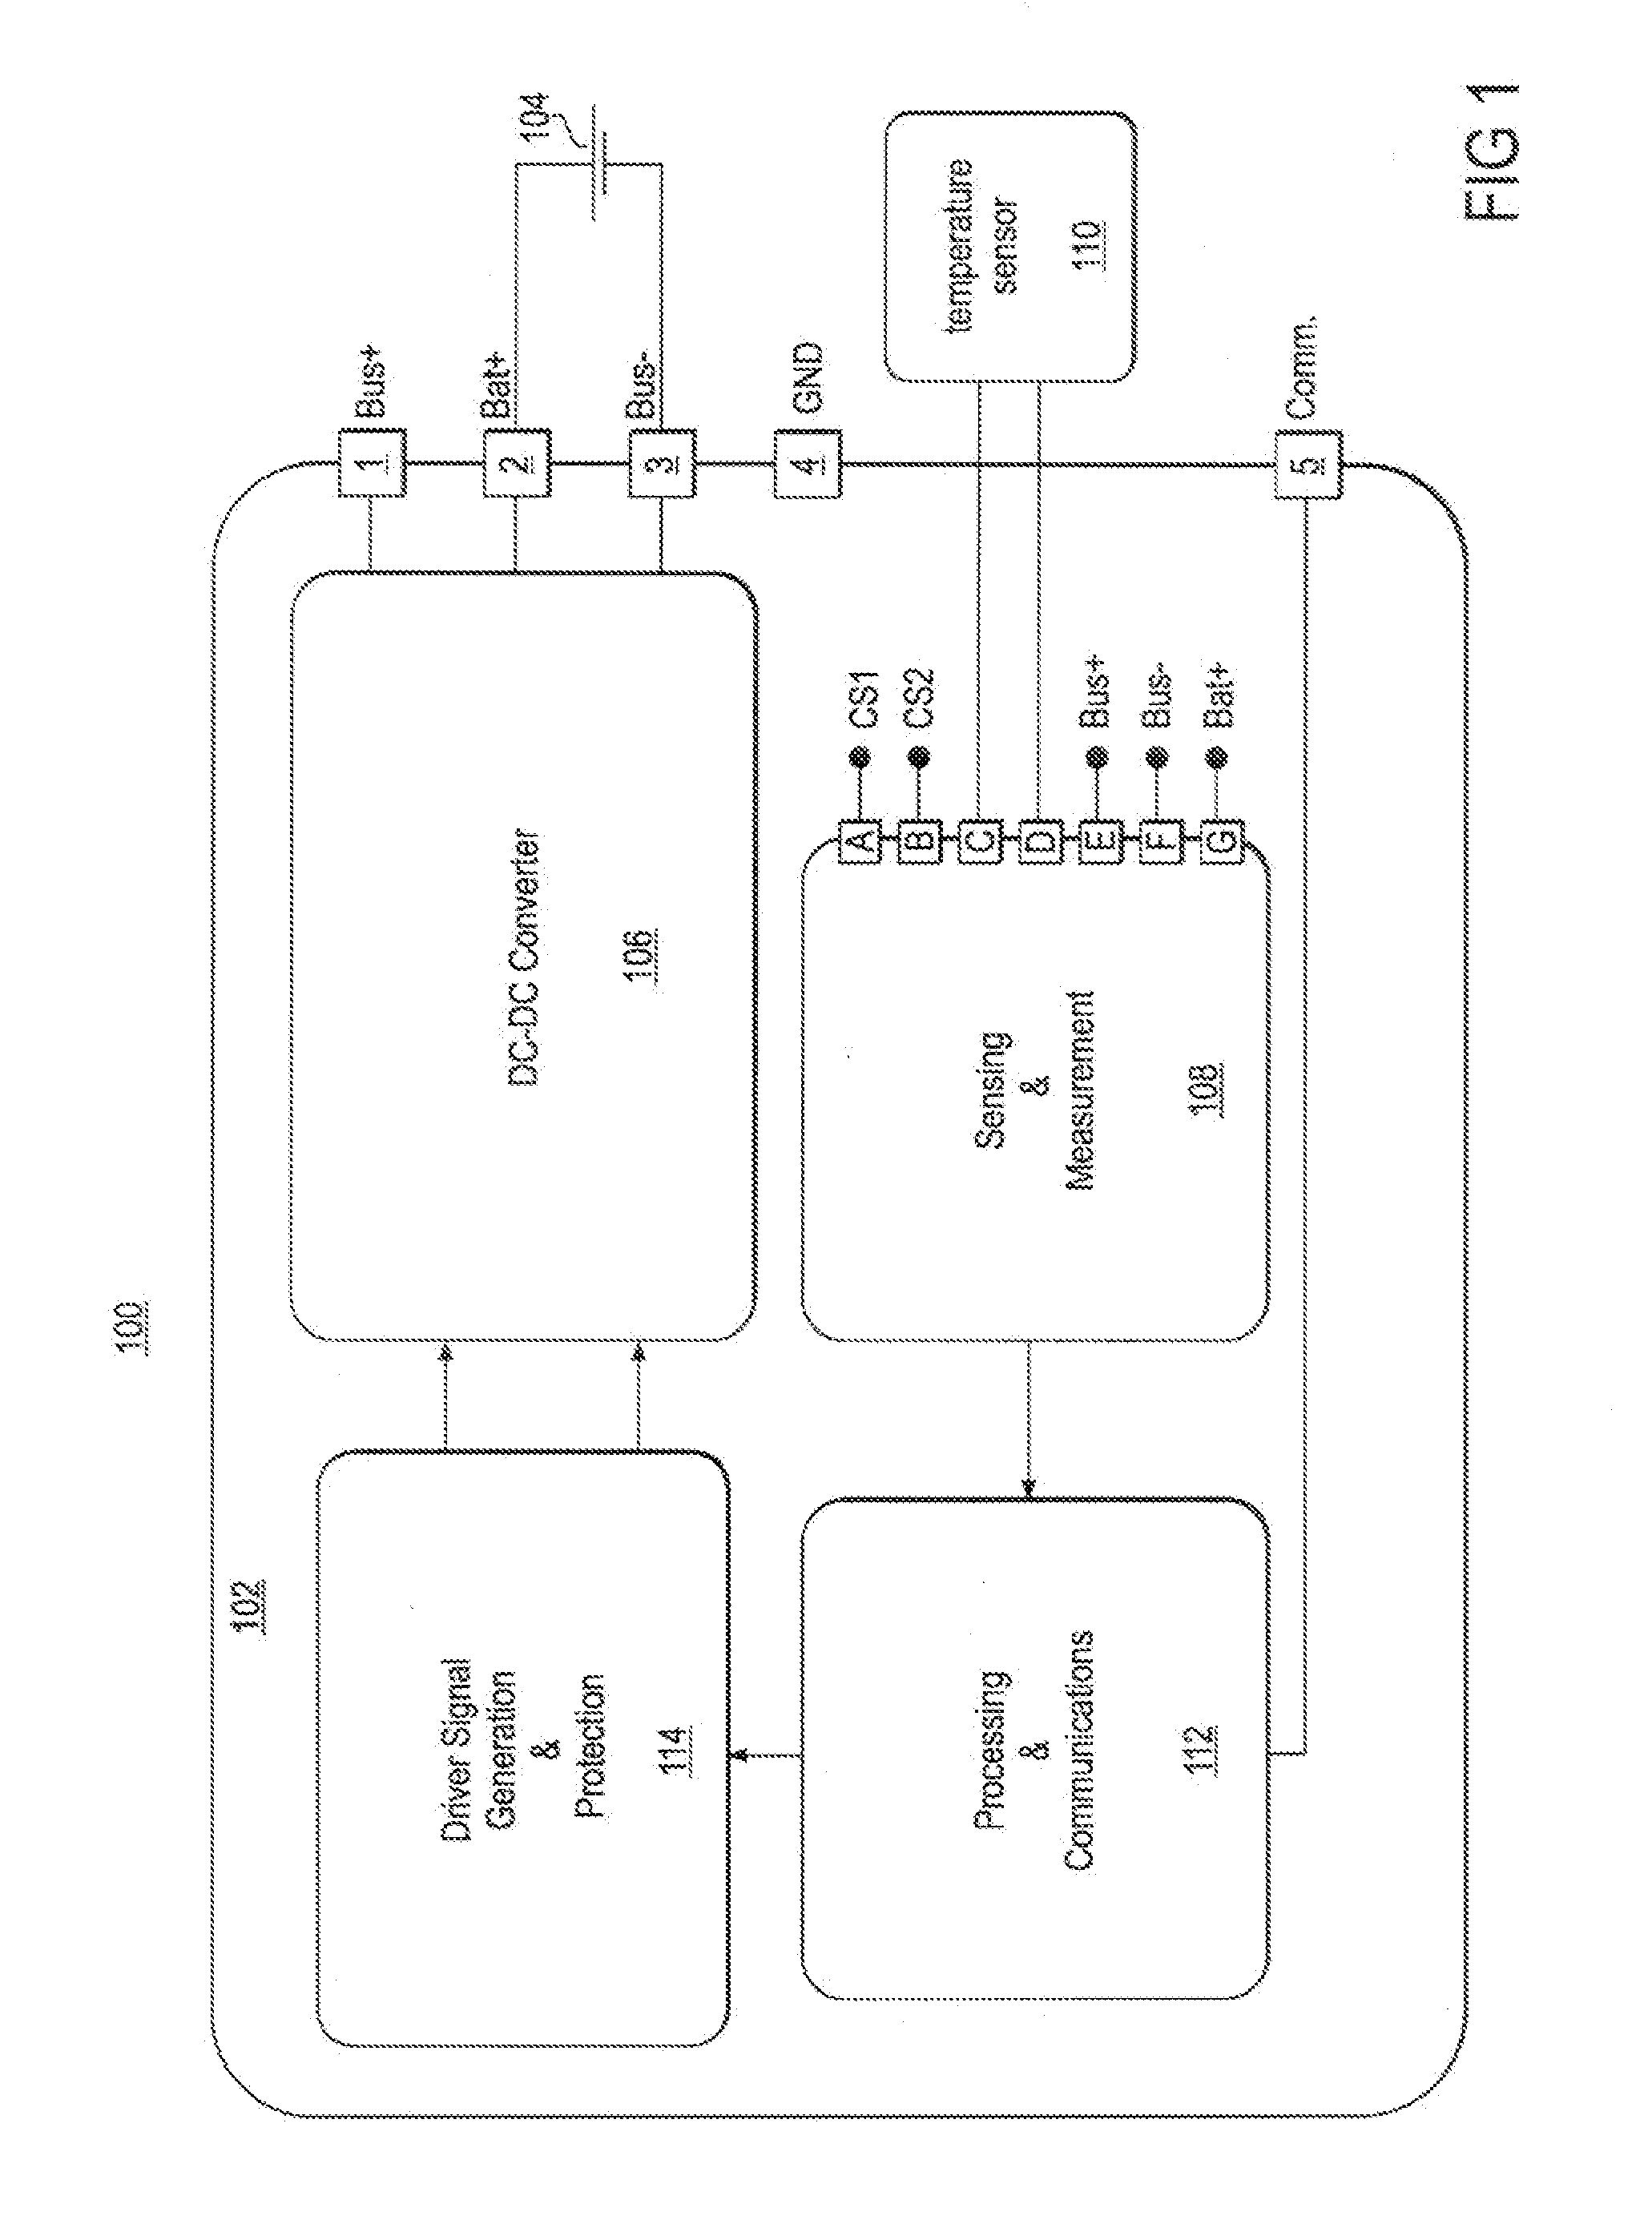 Systems and Methods for Scalable Configurations of Intelligent Energy Storage Packs